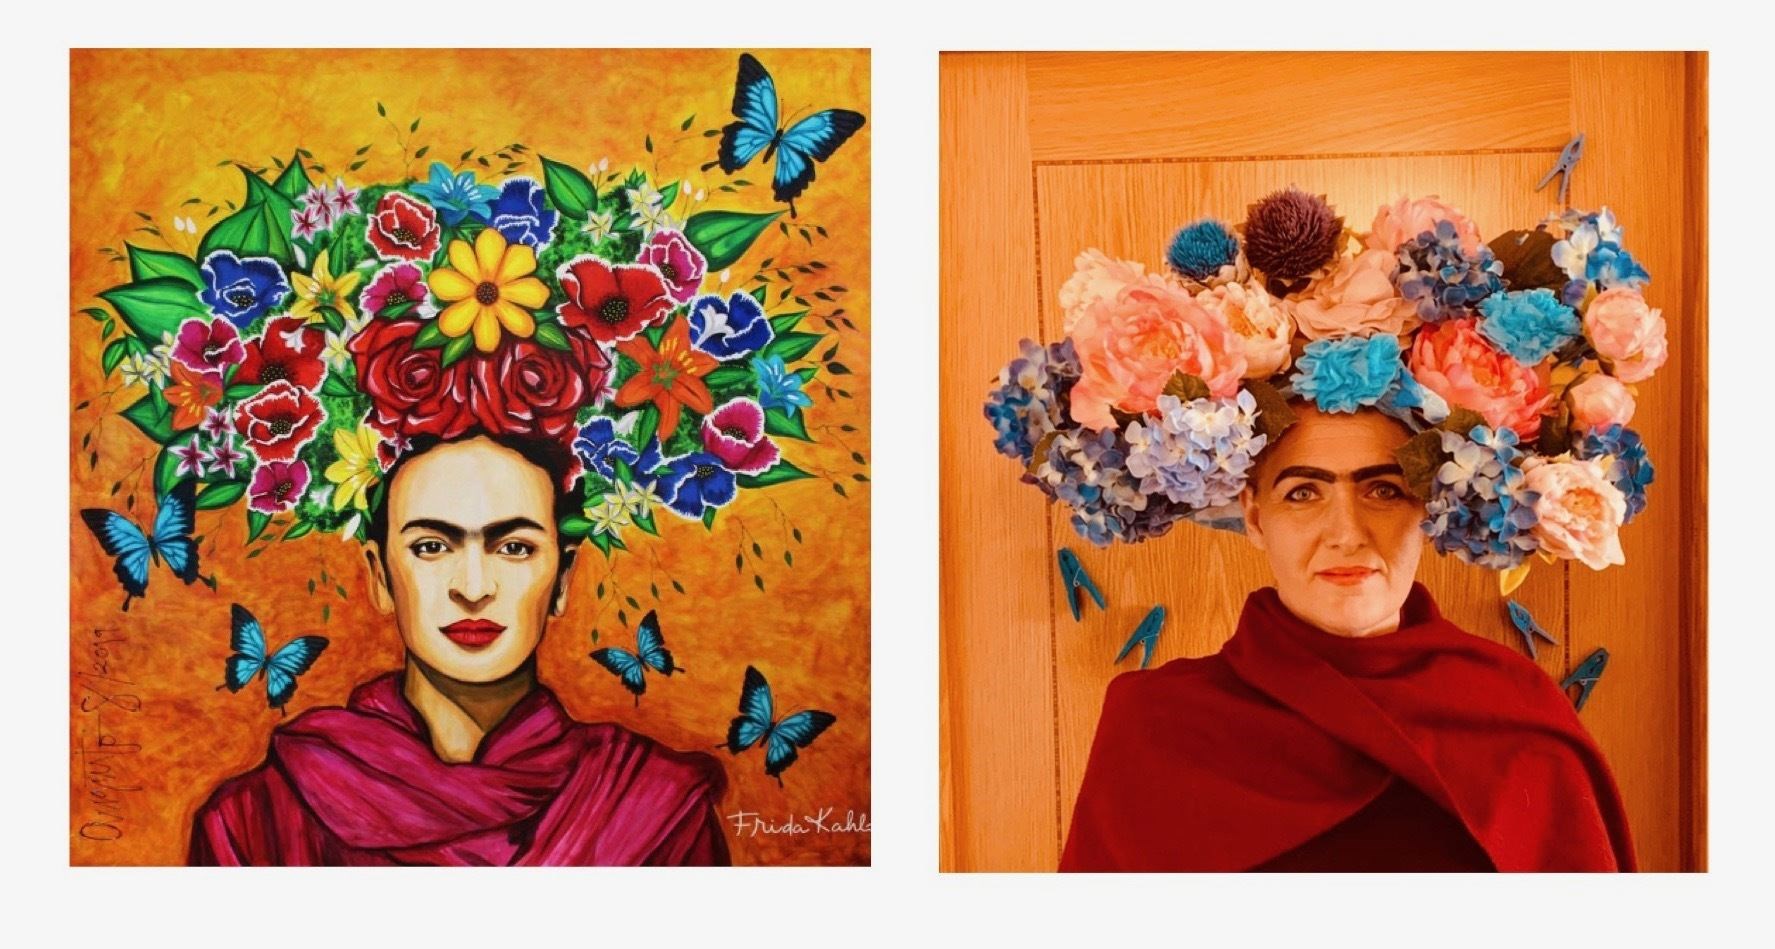 Teacher Dawn Ure with her creation which kick-started the project, Mexican painter Frida Kahlo, painted by Augusto Sanchez. She improvised with clothes pegs for the butterflies.